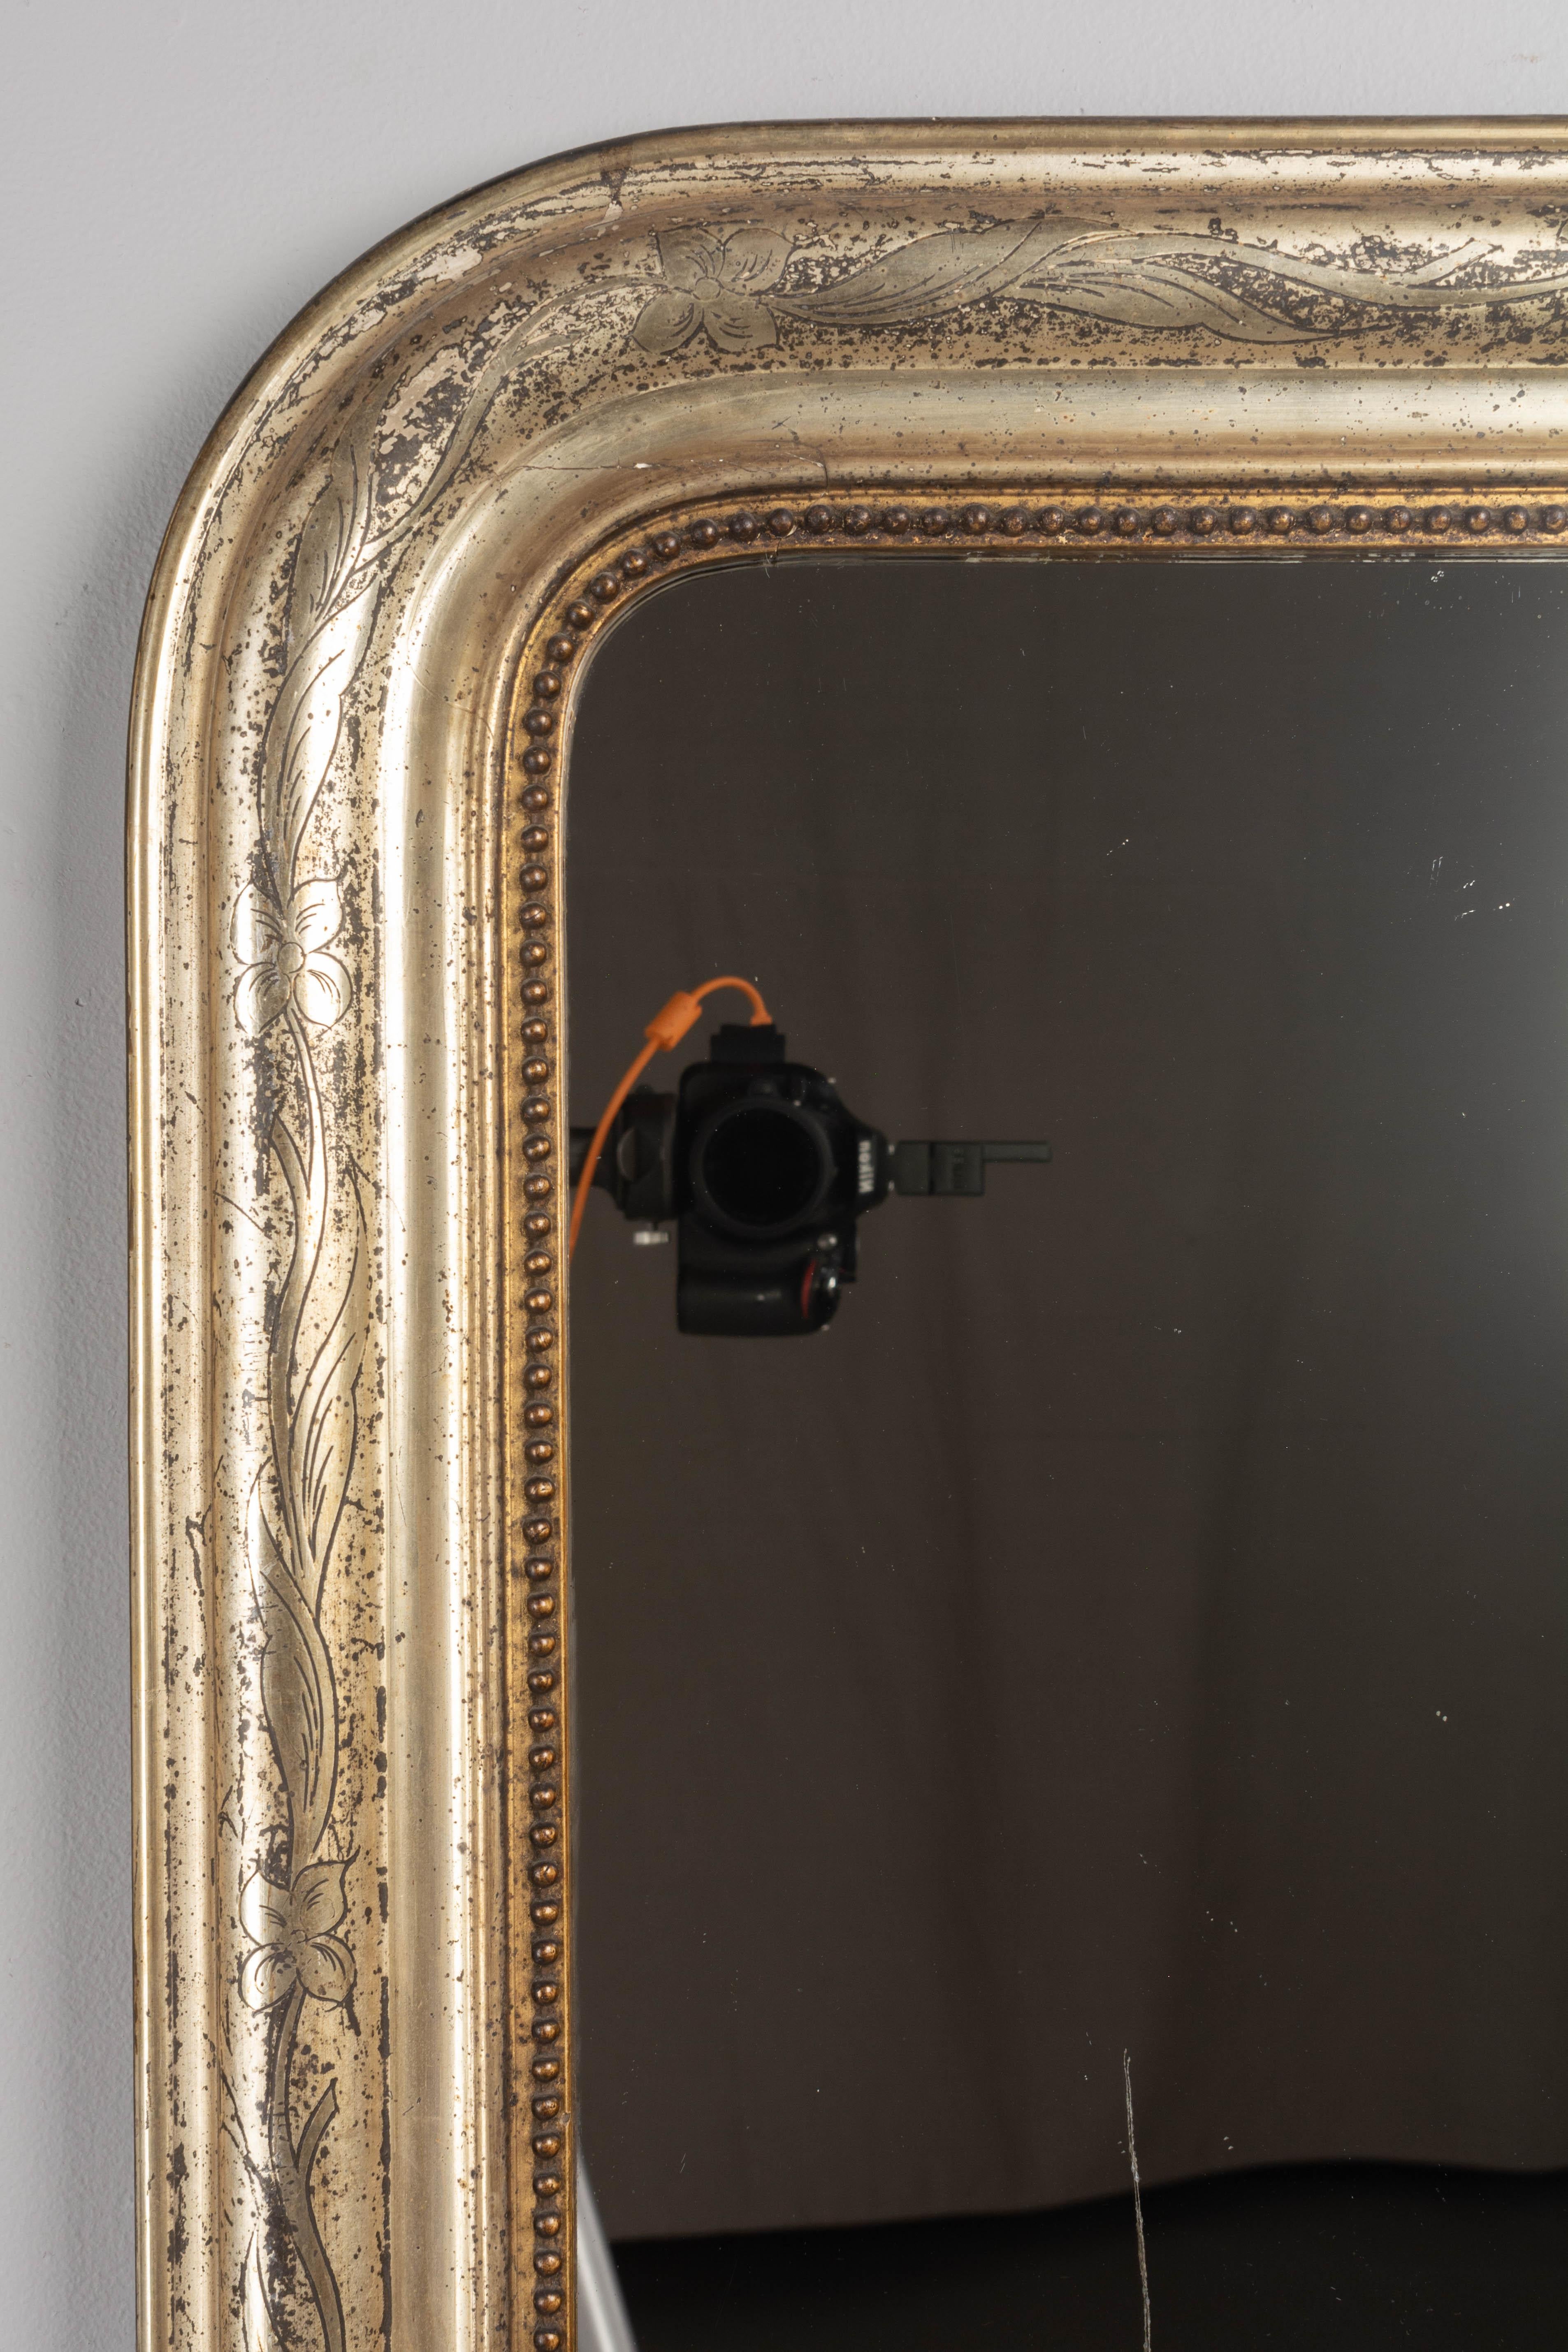 A 19th century French Louis Philippe style gilded mantel mirror with curved top corners, incised decoration and inner bead border. Warm silvery gilt finish with beautiful patina. Minor losses to finish. Original mirror has some scratches. Please